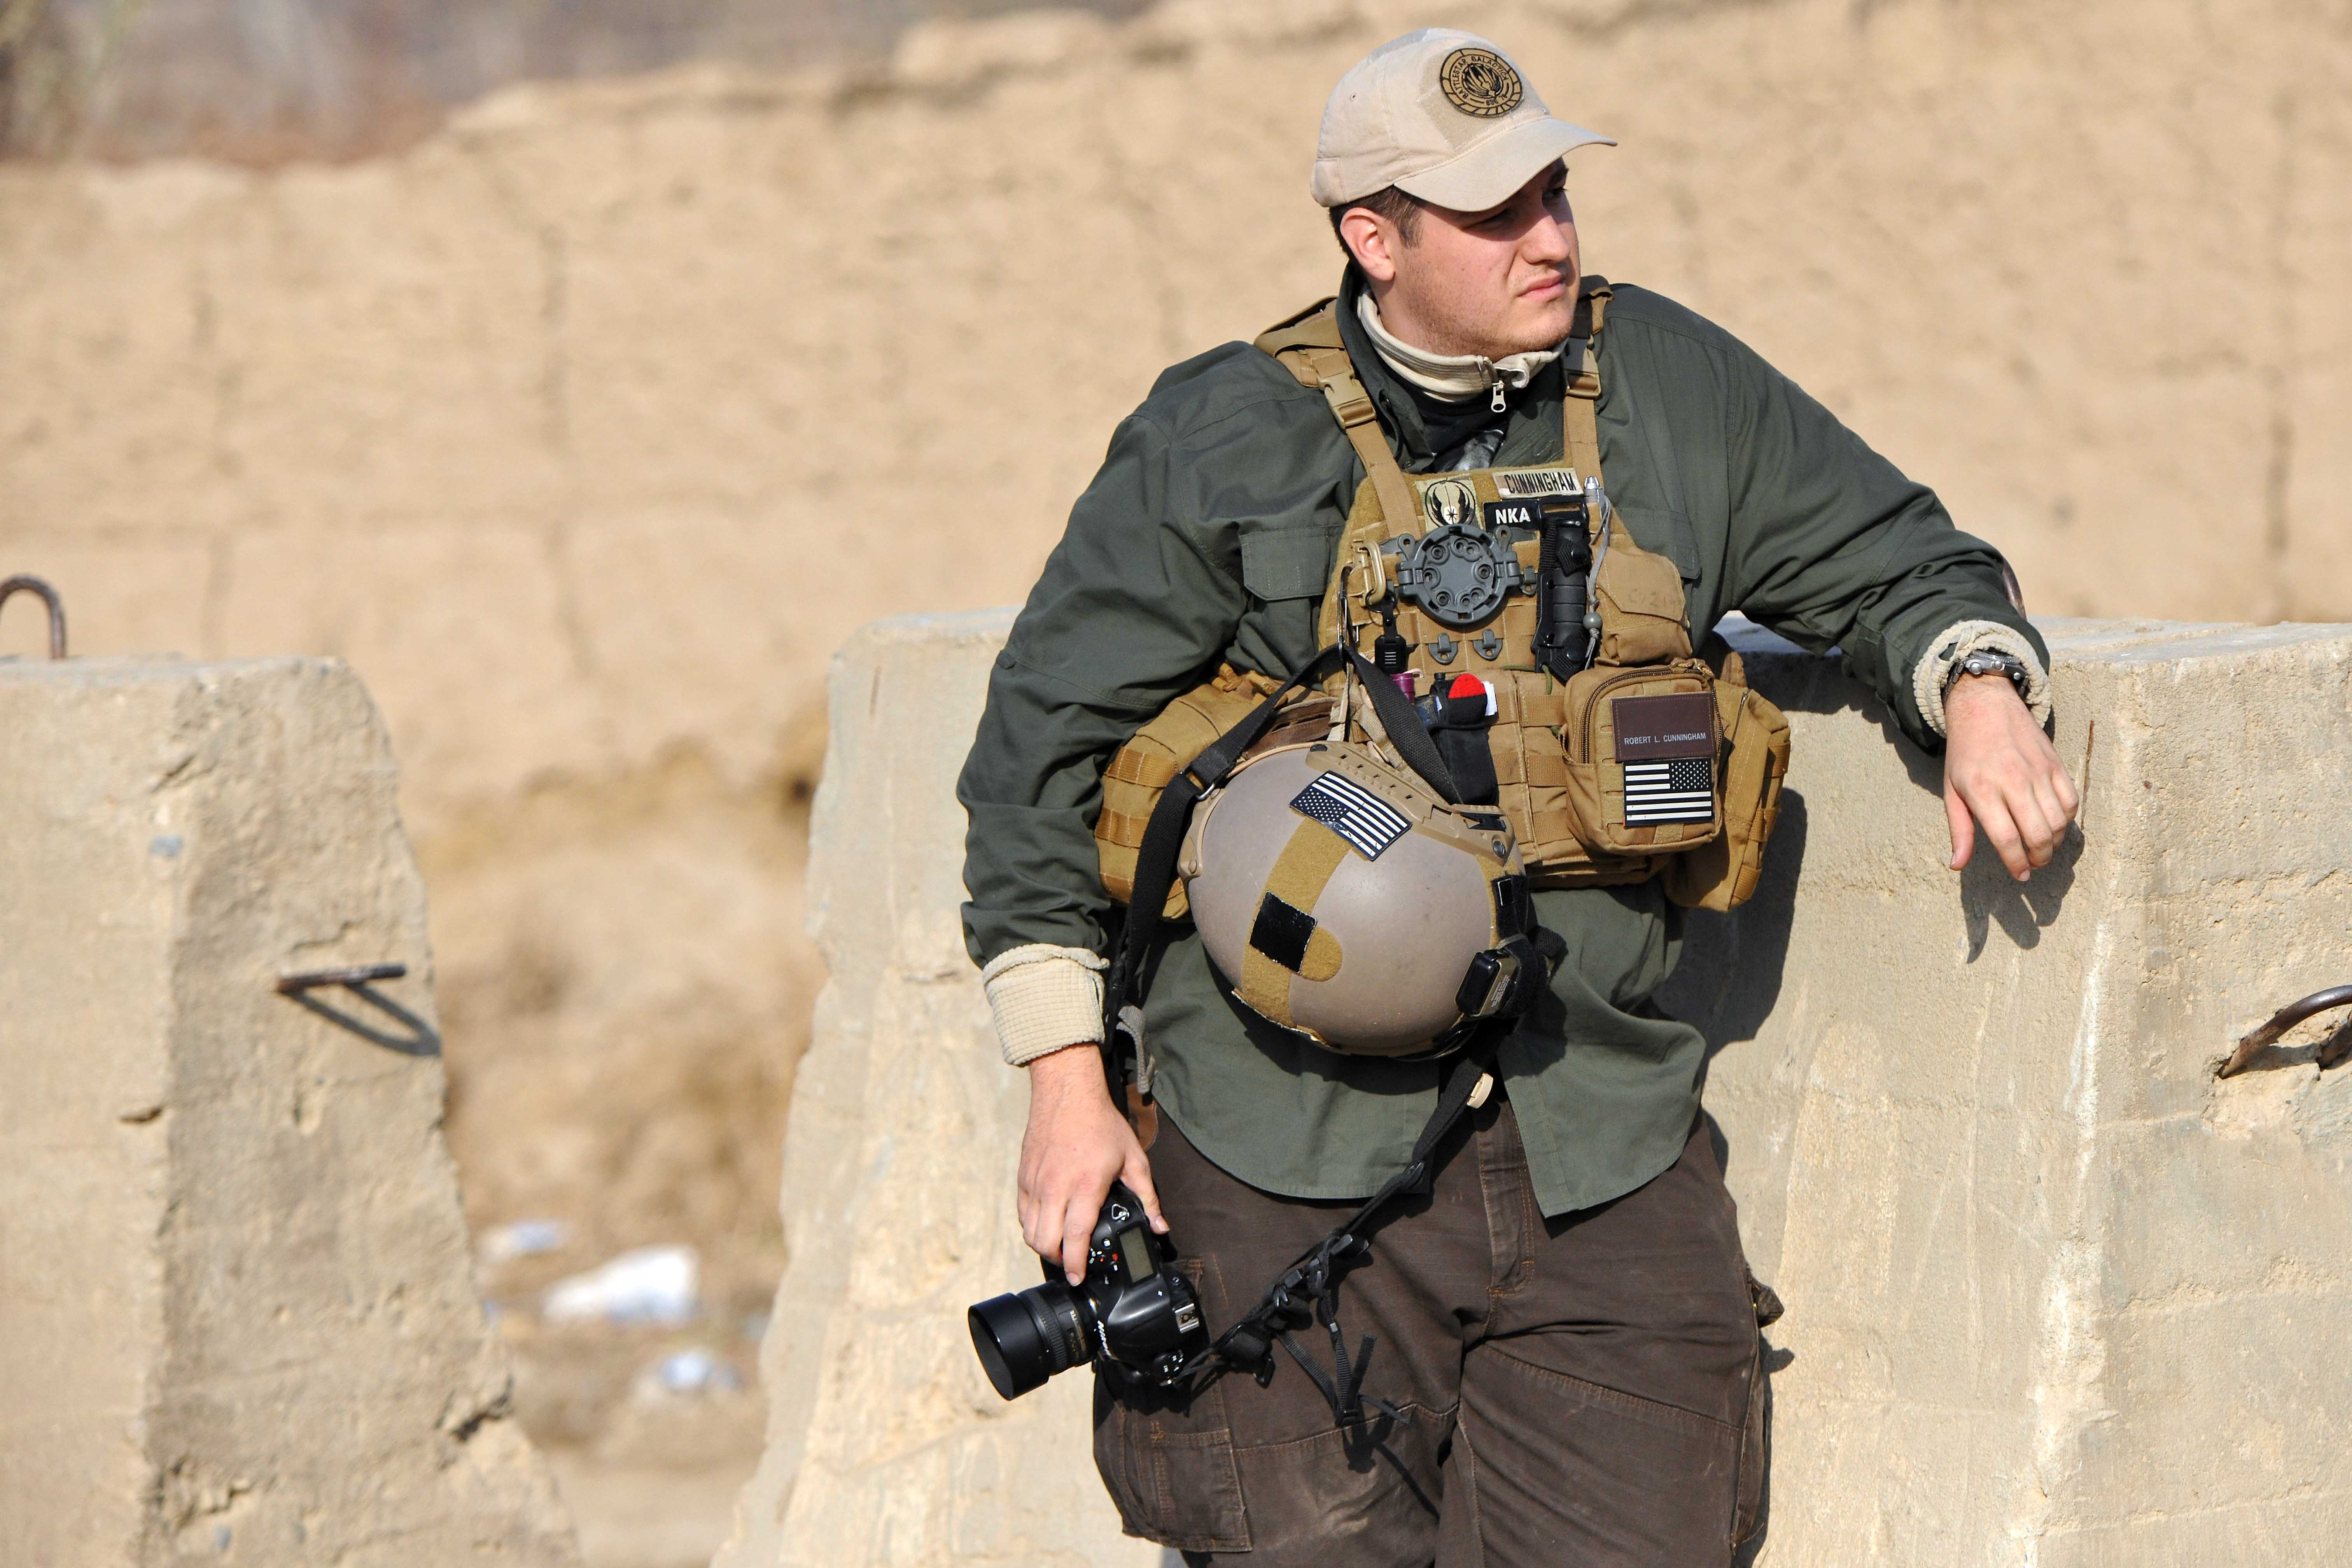 Robert Cunningham on location in Afghanistan while shooting a documentary film in 2012.